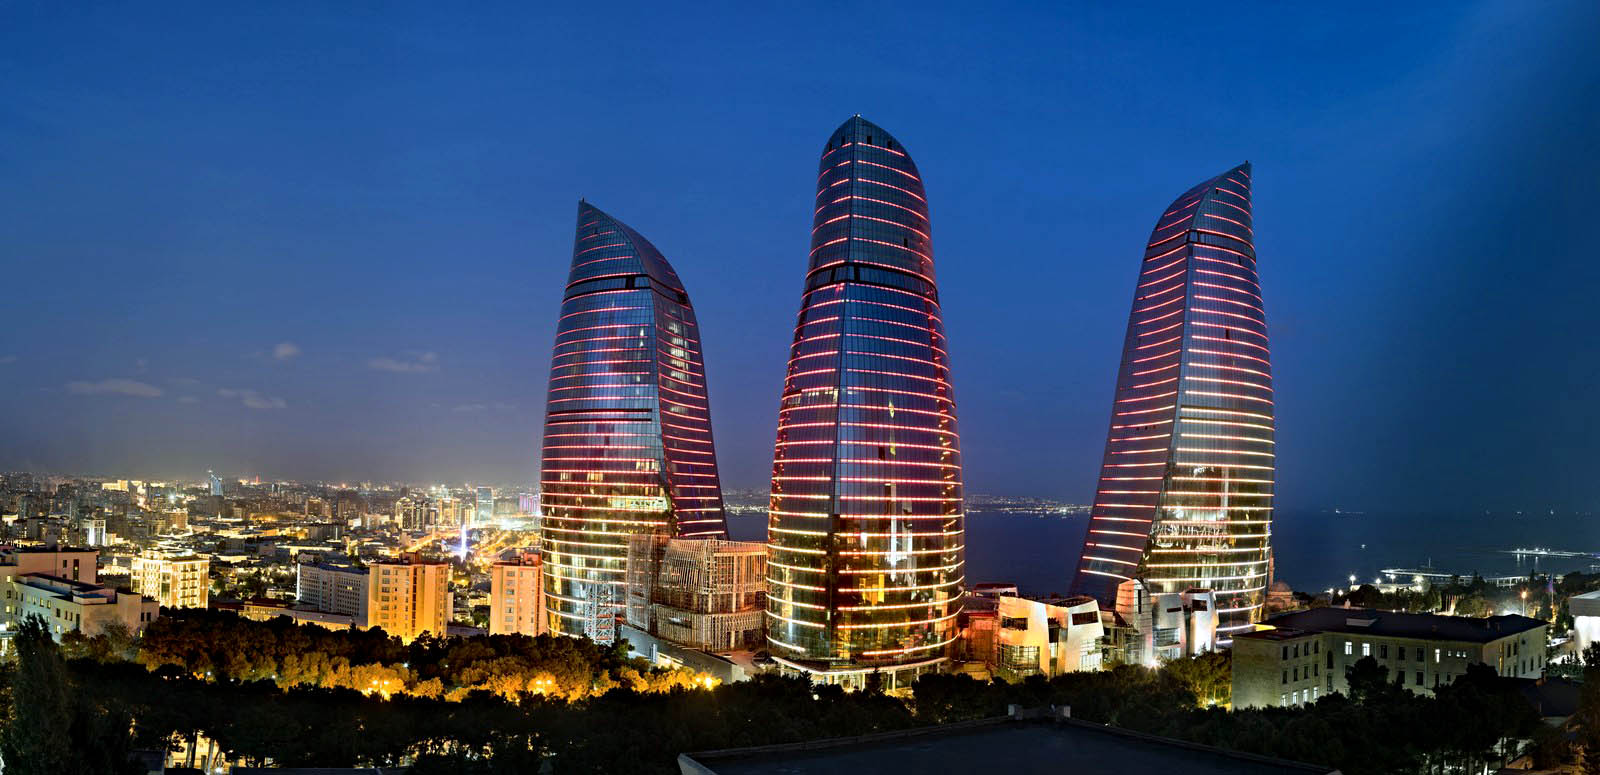 Completed in 2012, the Flame Towers are the tallest skyscrapers in Baku. © Niyaz from Baku